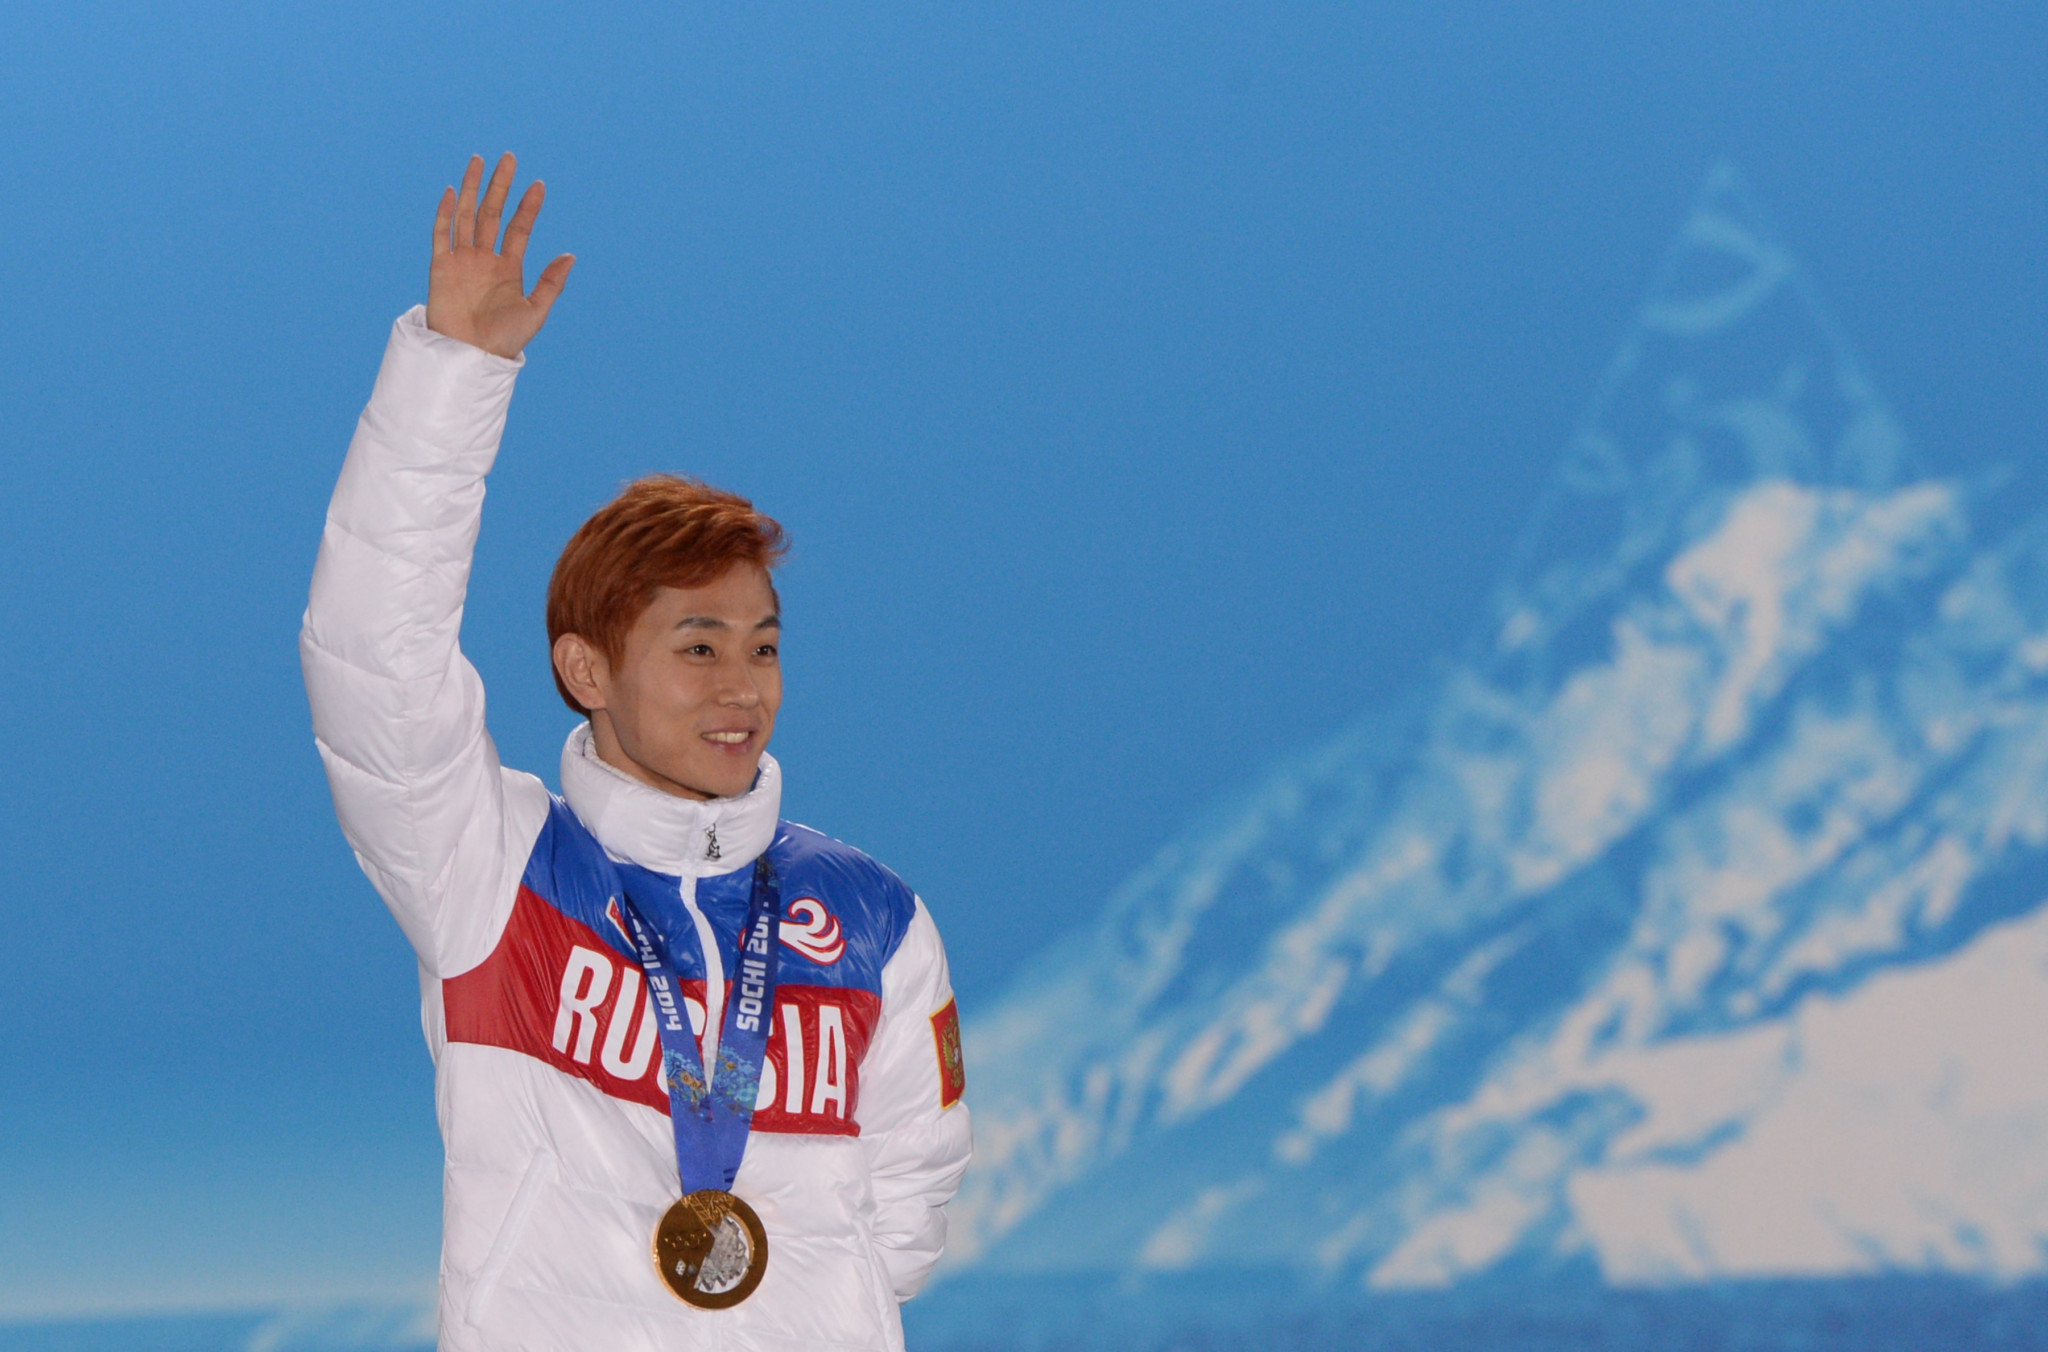 Viktor Ahn won three gold medals and a bronze for Russia at the 2014 Winter Olympics in Sochi ©Getty Images